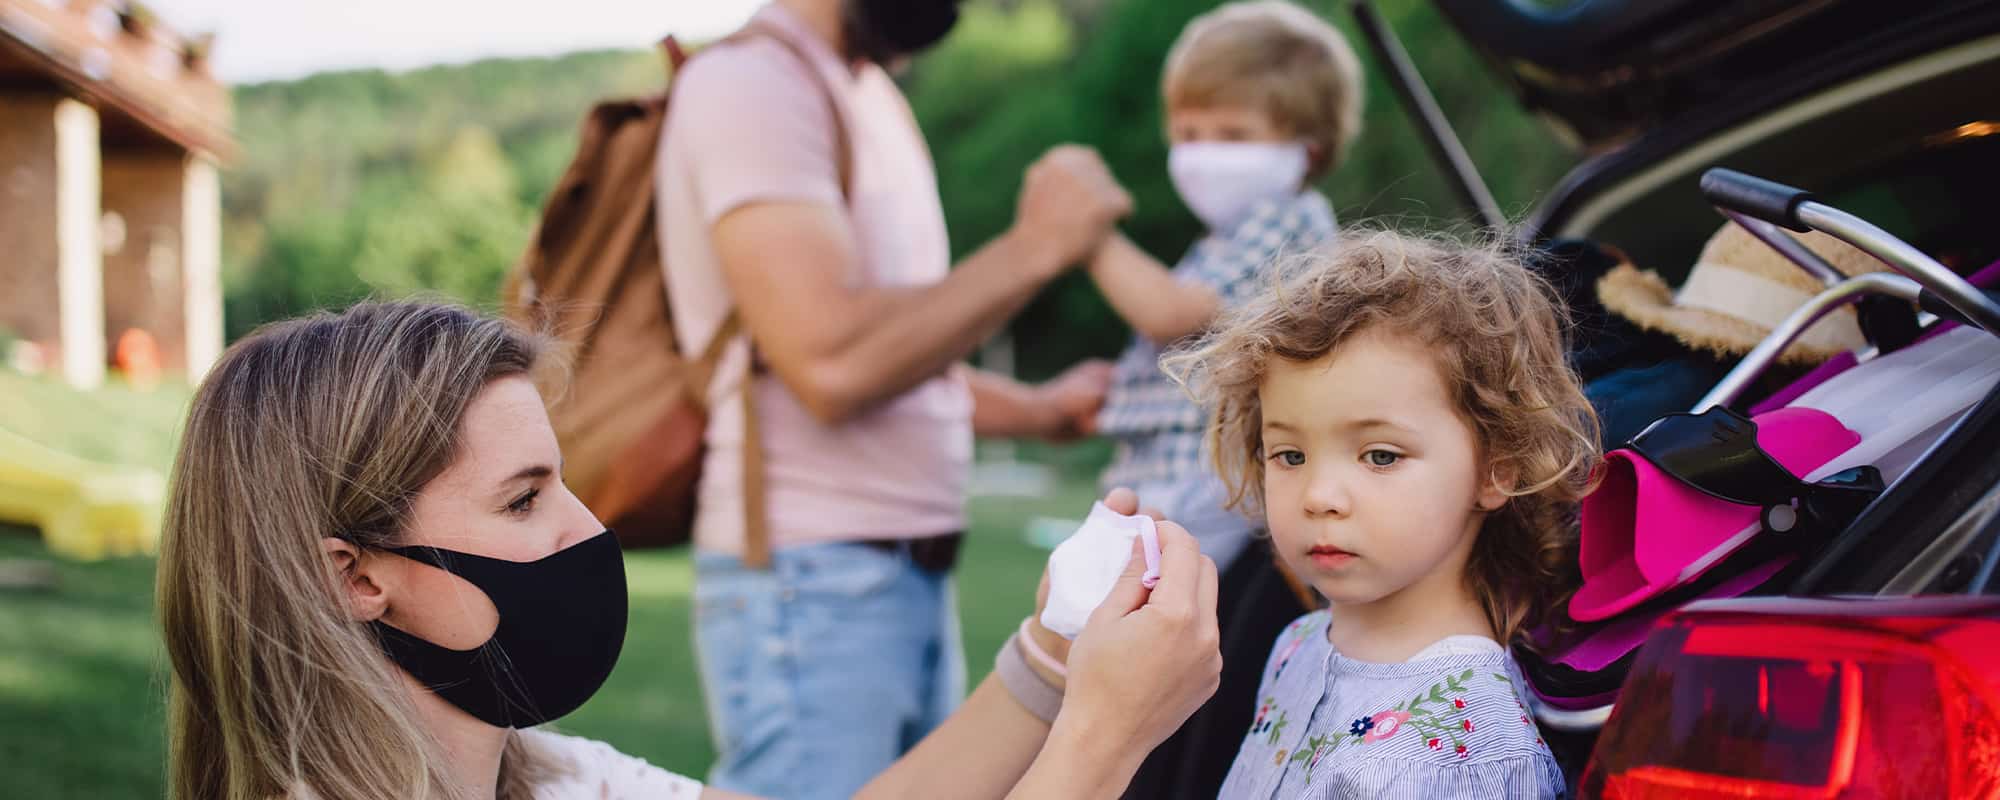 The Real Concerns Of Parents During The Pandemic